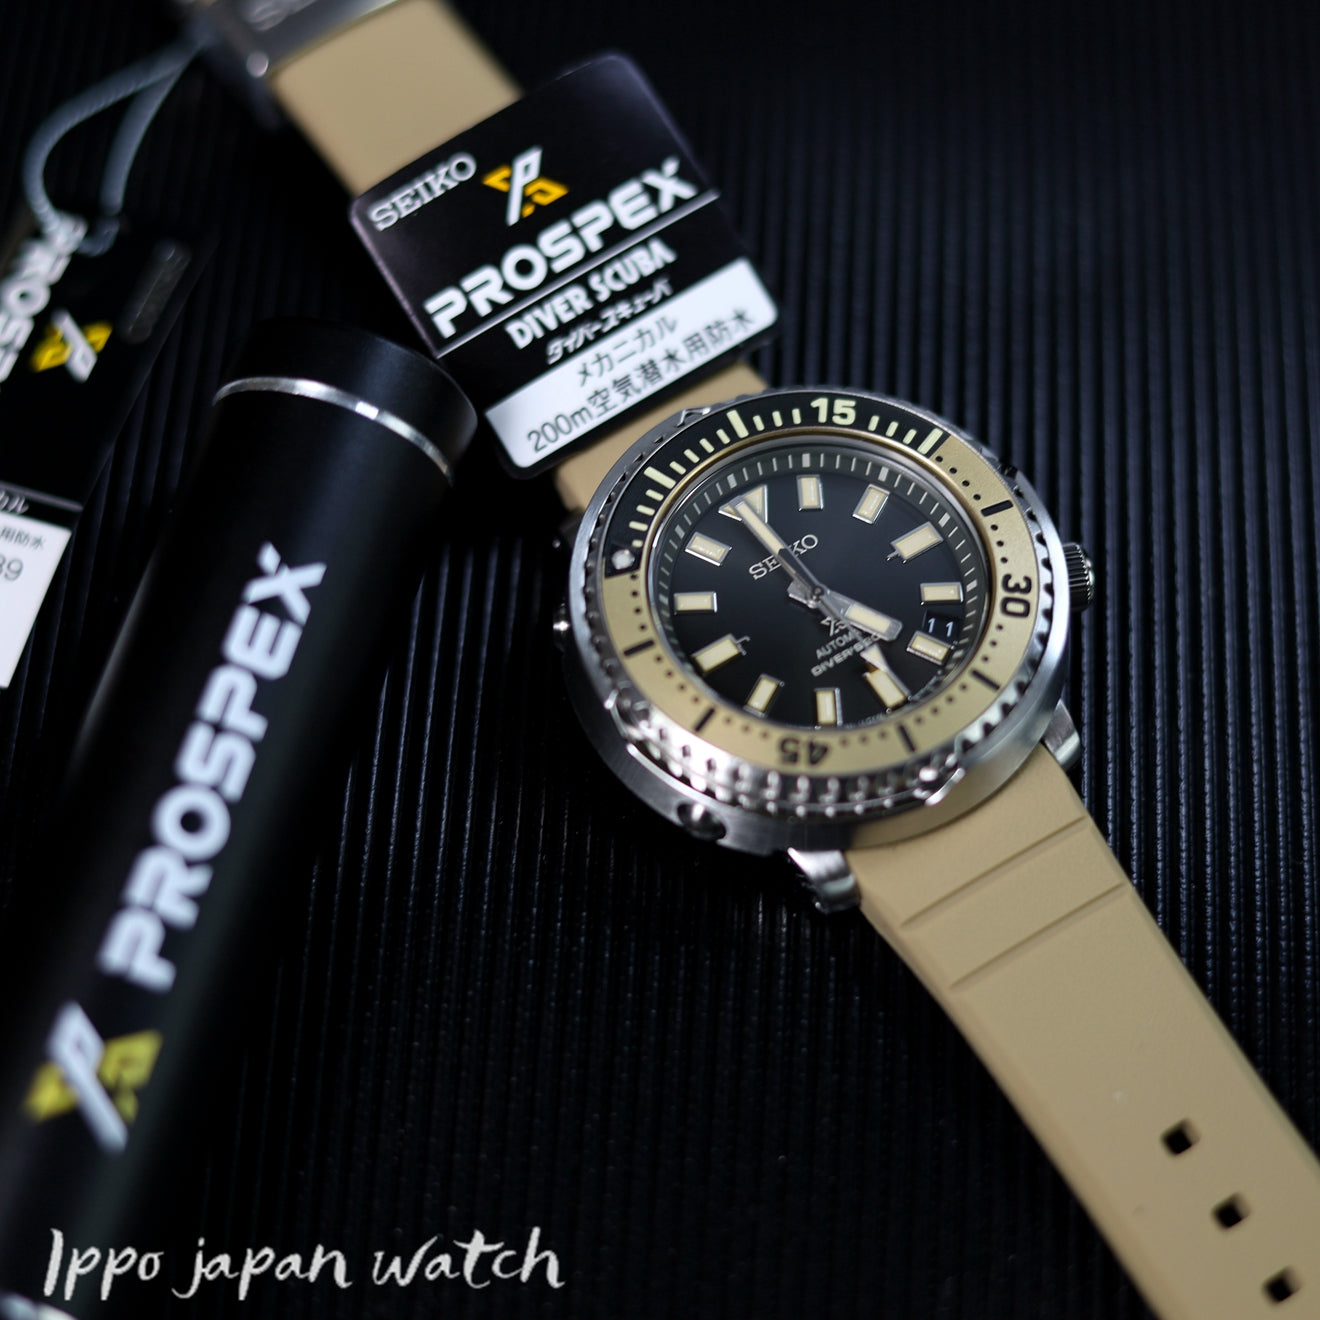 Seiko Prospex Diver SBDY089 Diver's 200M Men's Watch – IPPO JAPAN WATCH